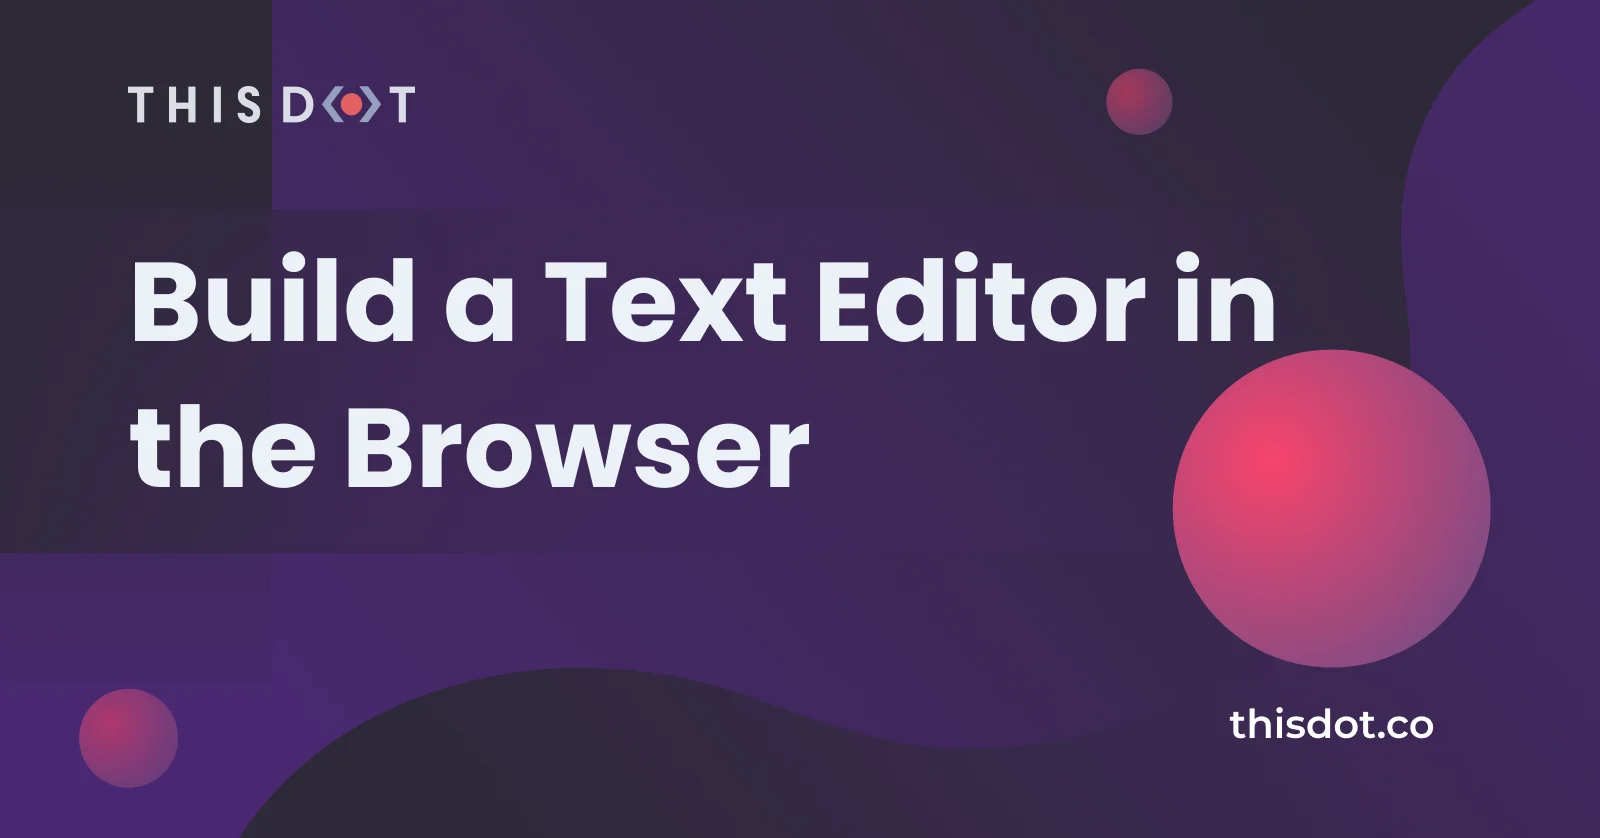 Build a Text Editor in the Browser cover image